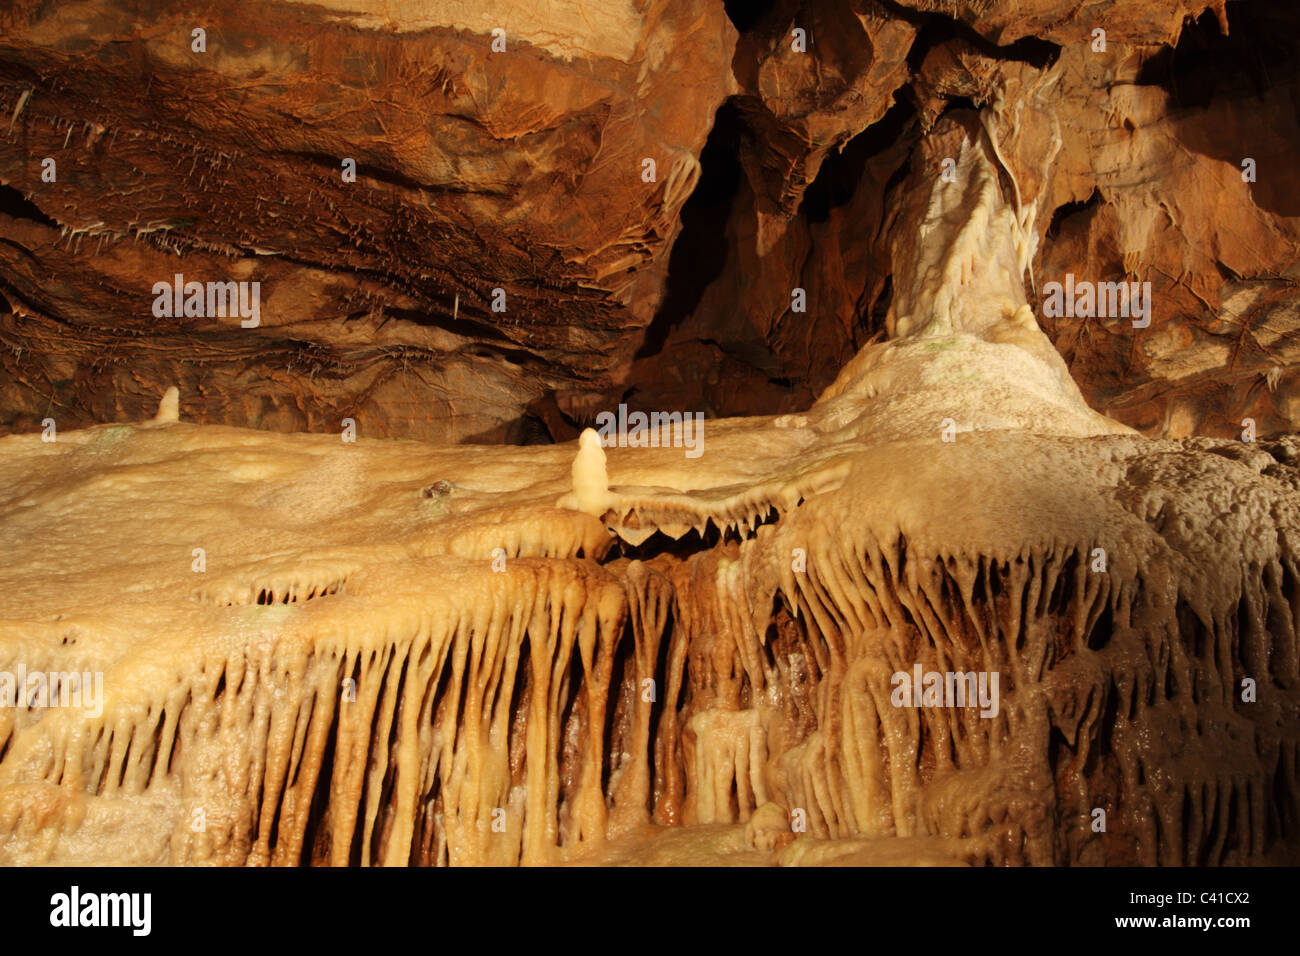 Underground rock formations and stalactites and stalagmites in Cheddar Caves, Cheddar Village, Somerset, United Kingdom Stock Photo